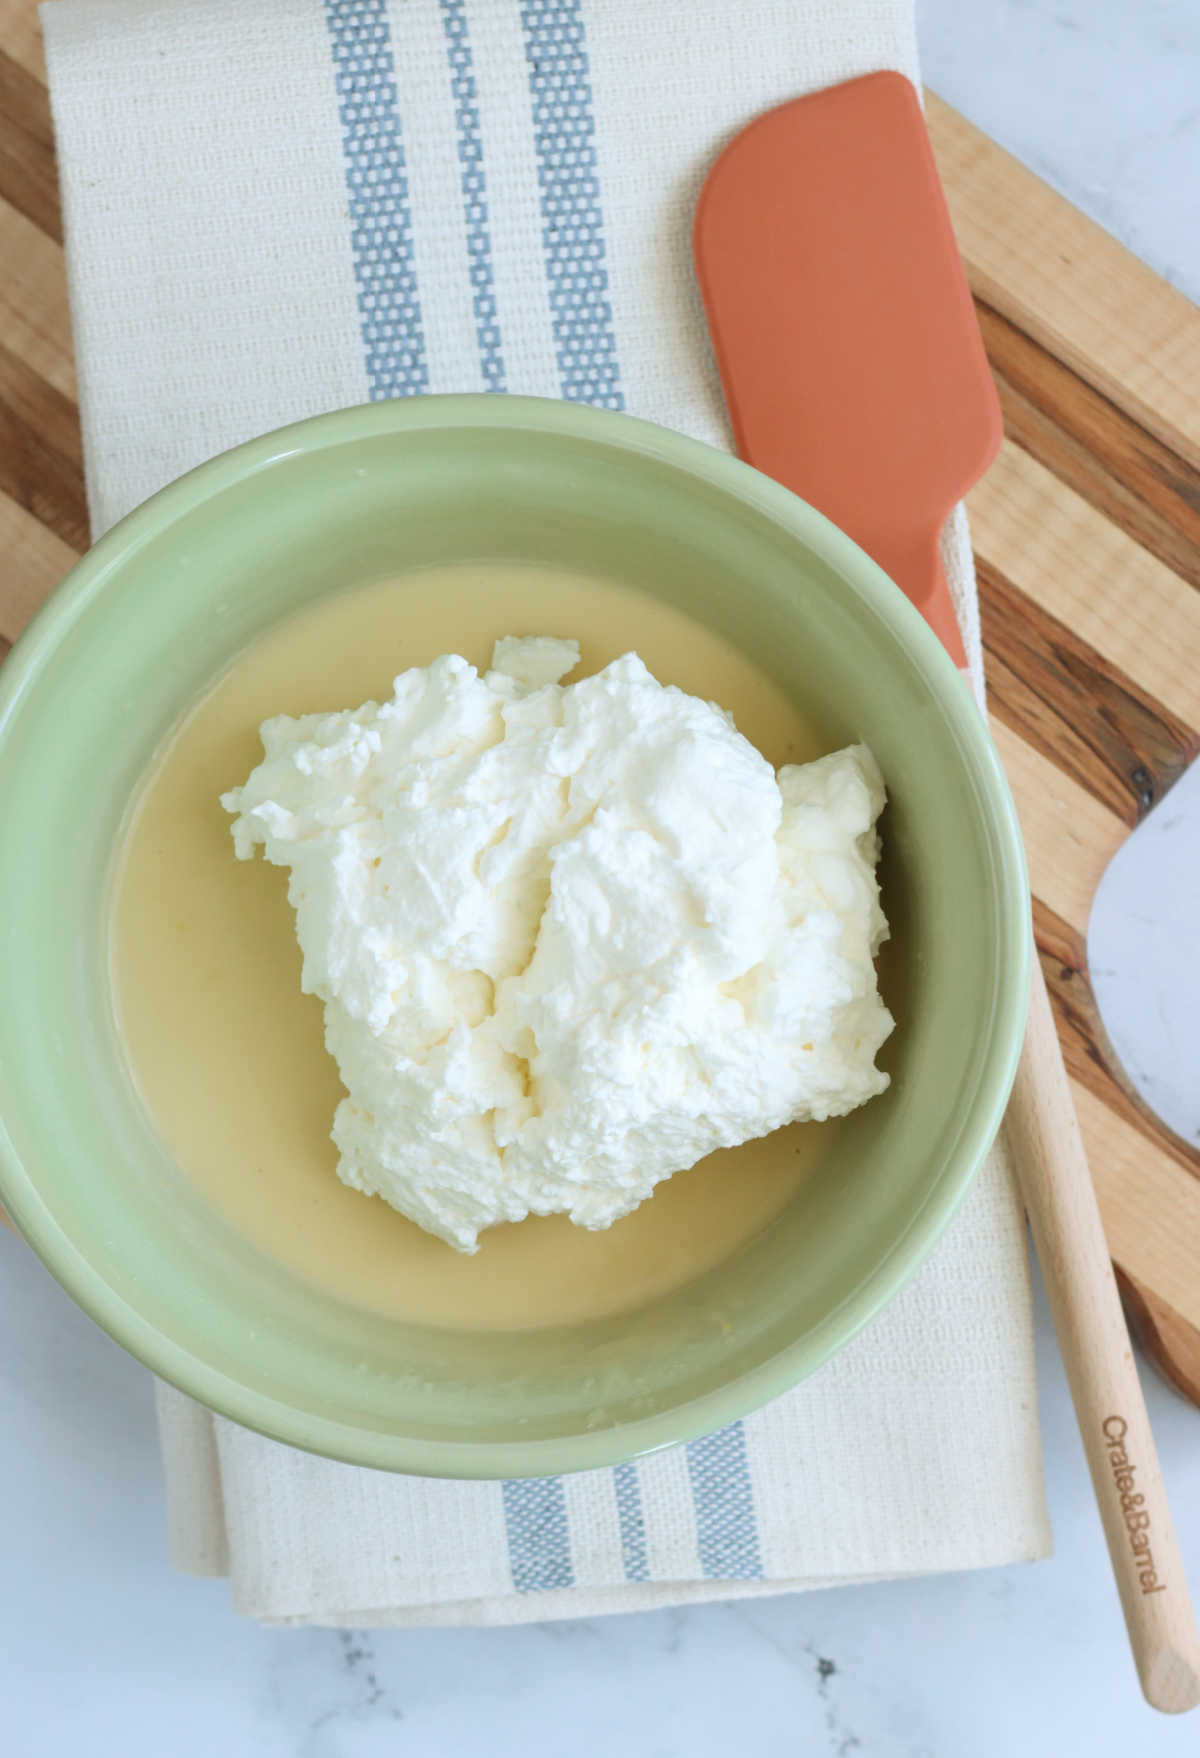 Pudding and whipped cream in pale green mixing bowl on wooden cutting board.